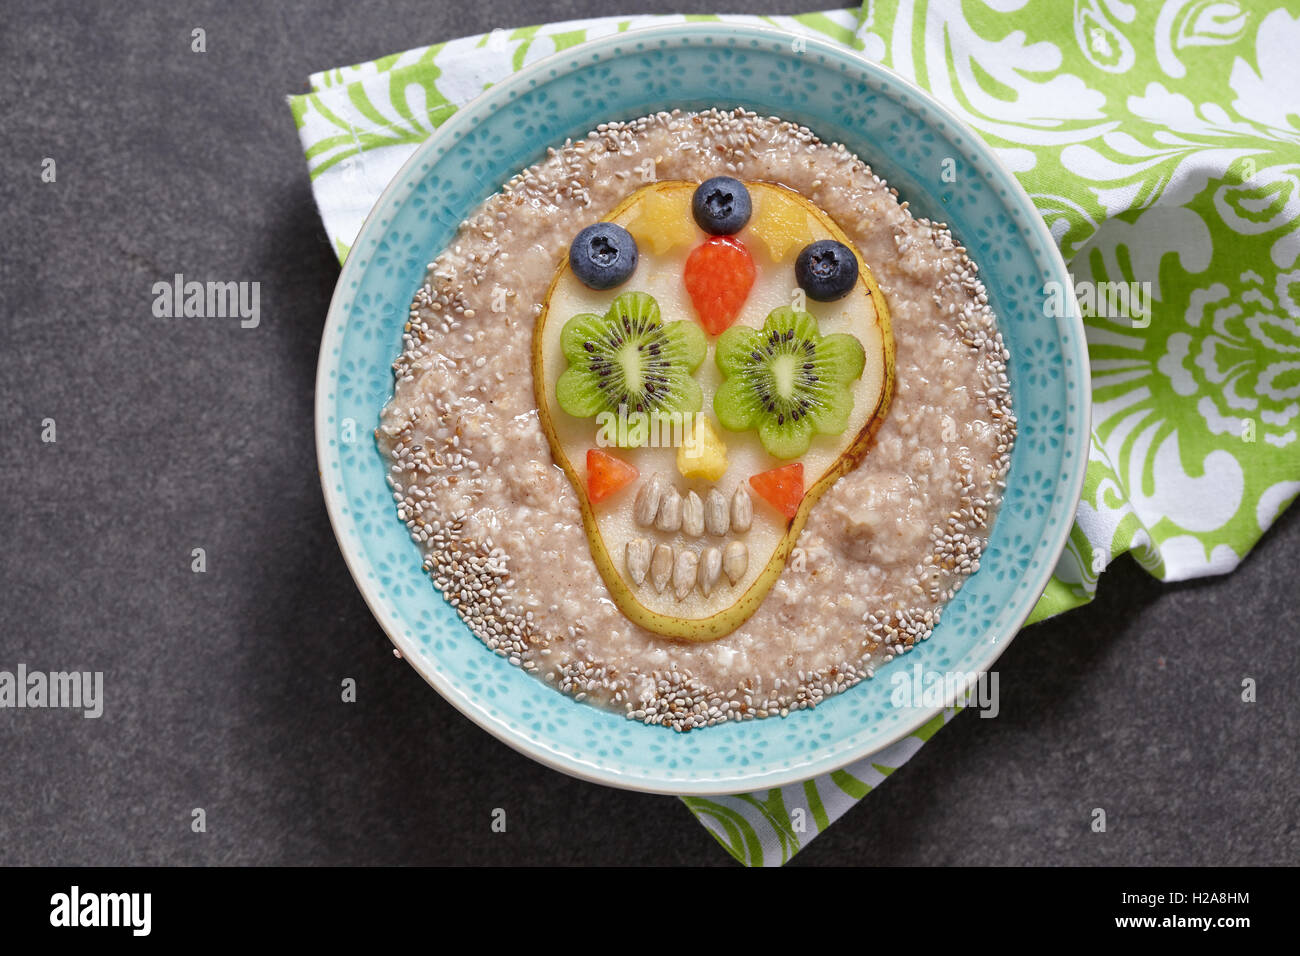 Sugar scull pear with oatmeal Stock Photo